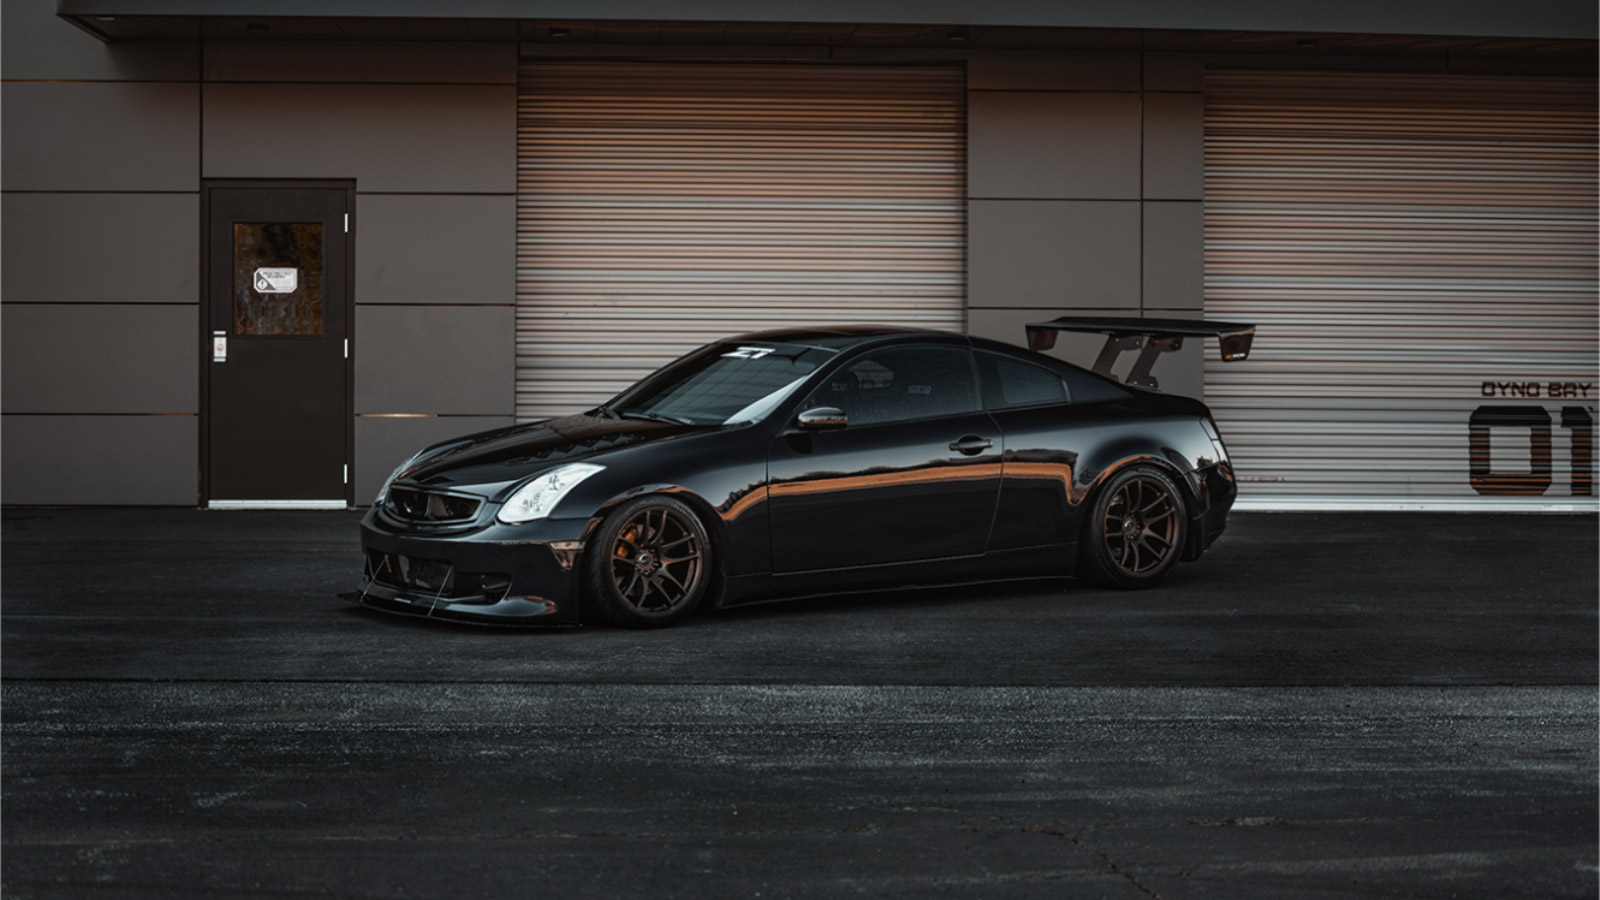 SUMMER MODS The ultimate upgrades for your G35